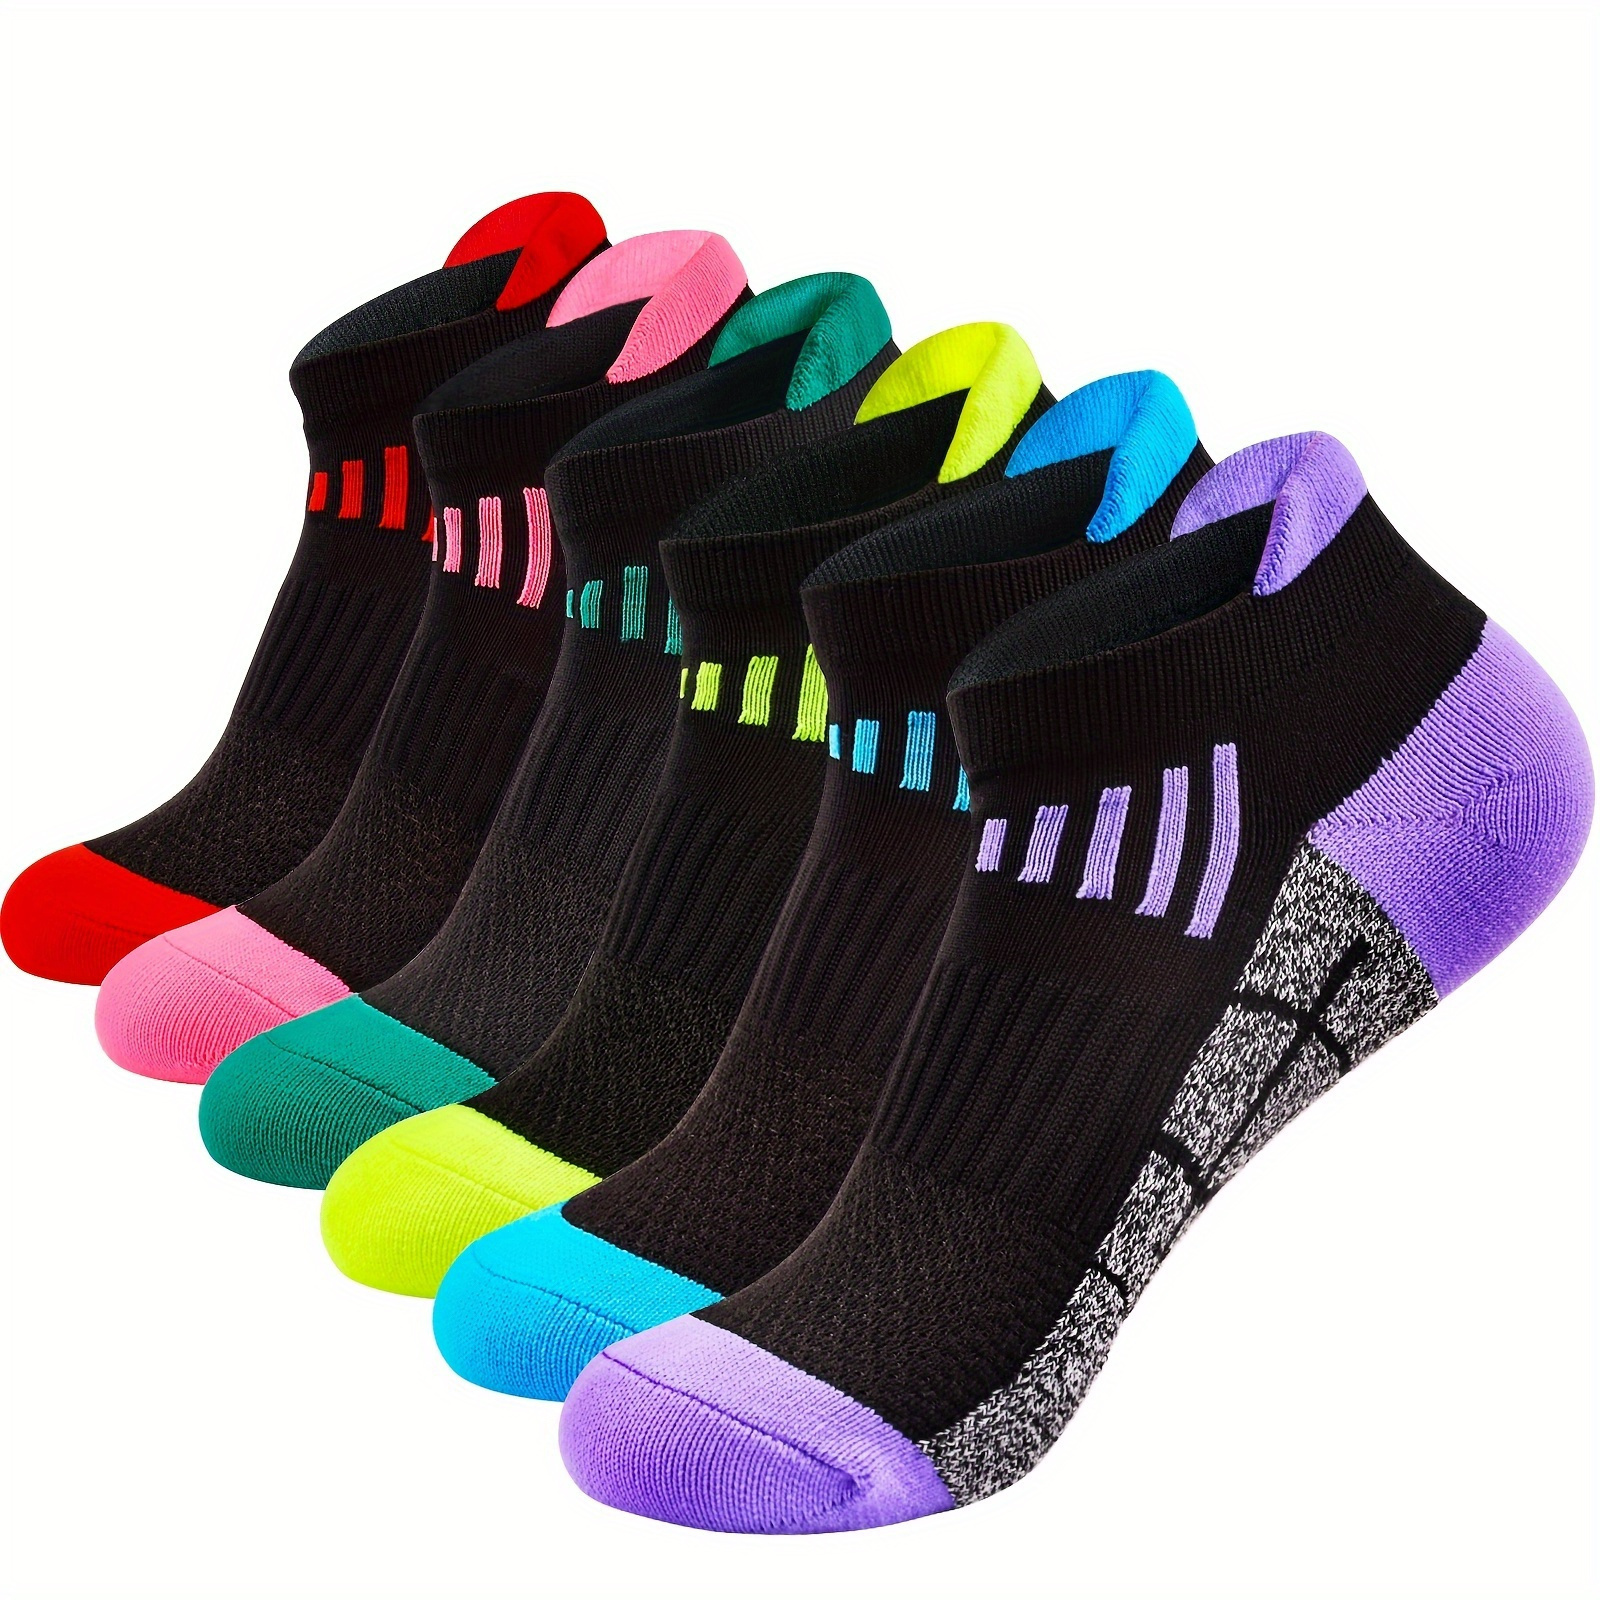 

6 Pairs Women's Compression Athletic Socks, Low Cut Cushioned Breathable Ankle Socks For Running Cycling Hiking